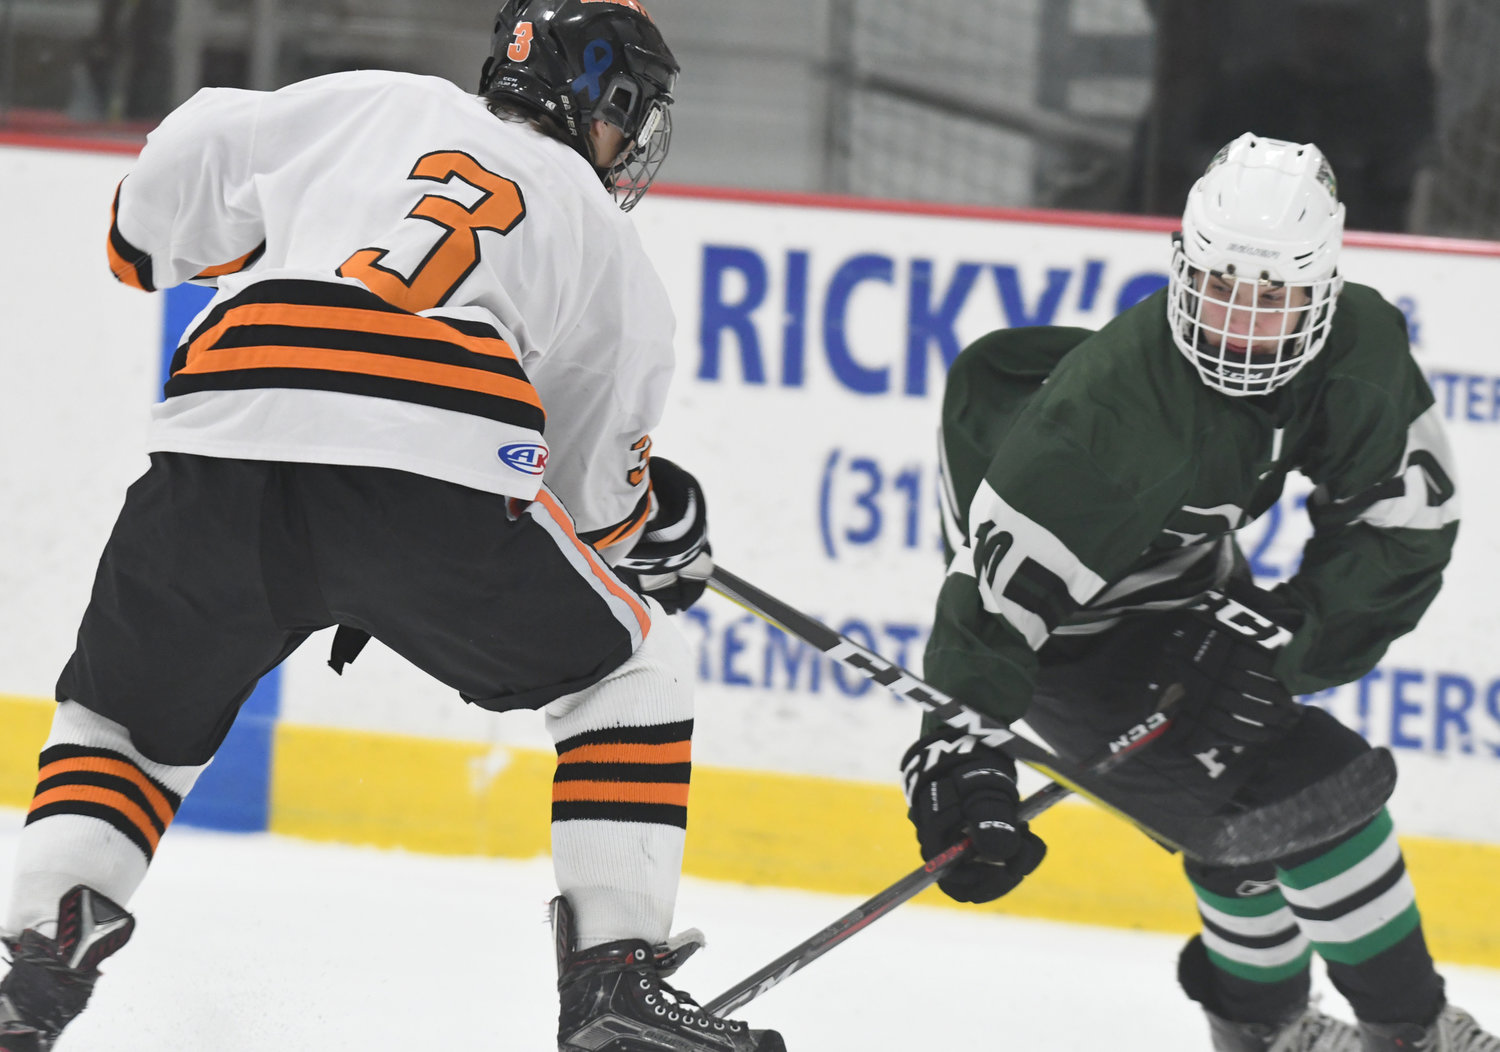 TRYING FOR A TURNOVER — RFA forward Kyle Lubey, left, tries to steal the puck away from Fayetteville-Manlius forward Josh Kuchinski during Tuesday’s game at Kennedy Arena. The visiting Hornets scored the first two goals and held off RFA for a 2-1 win.